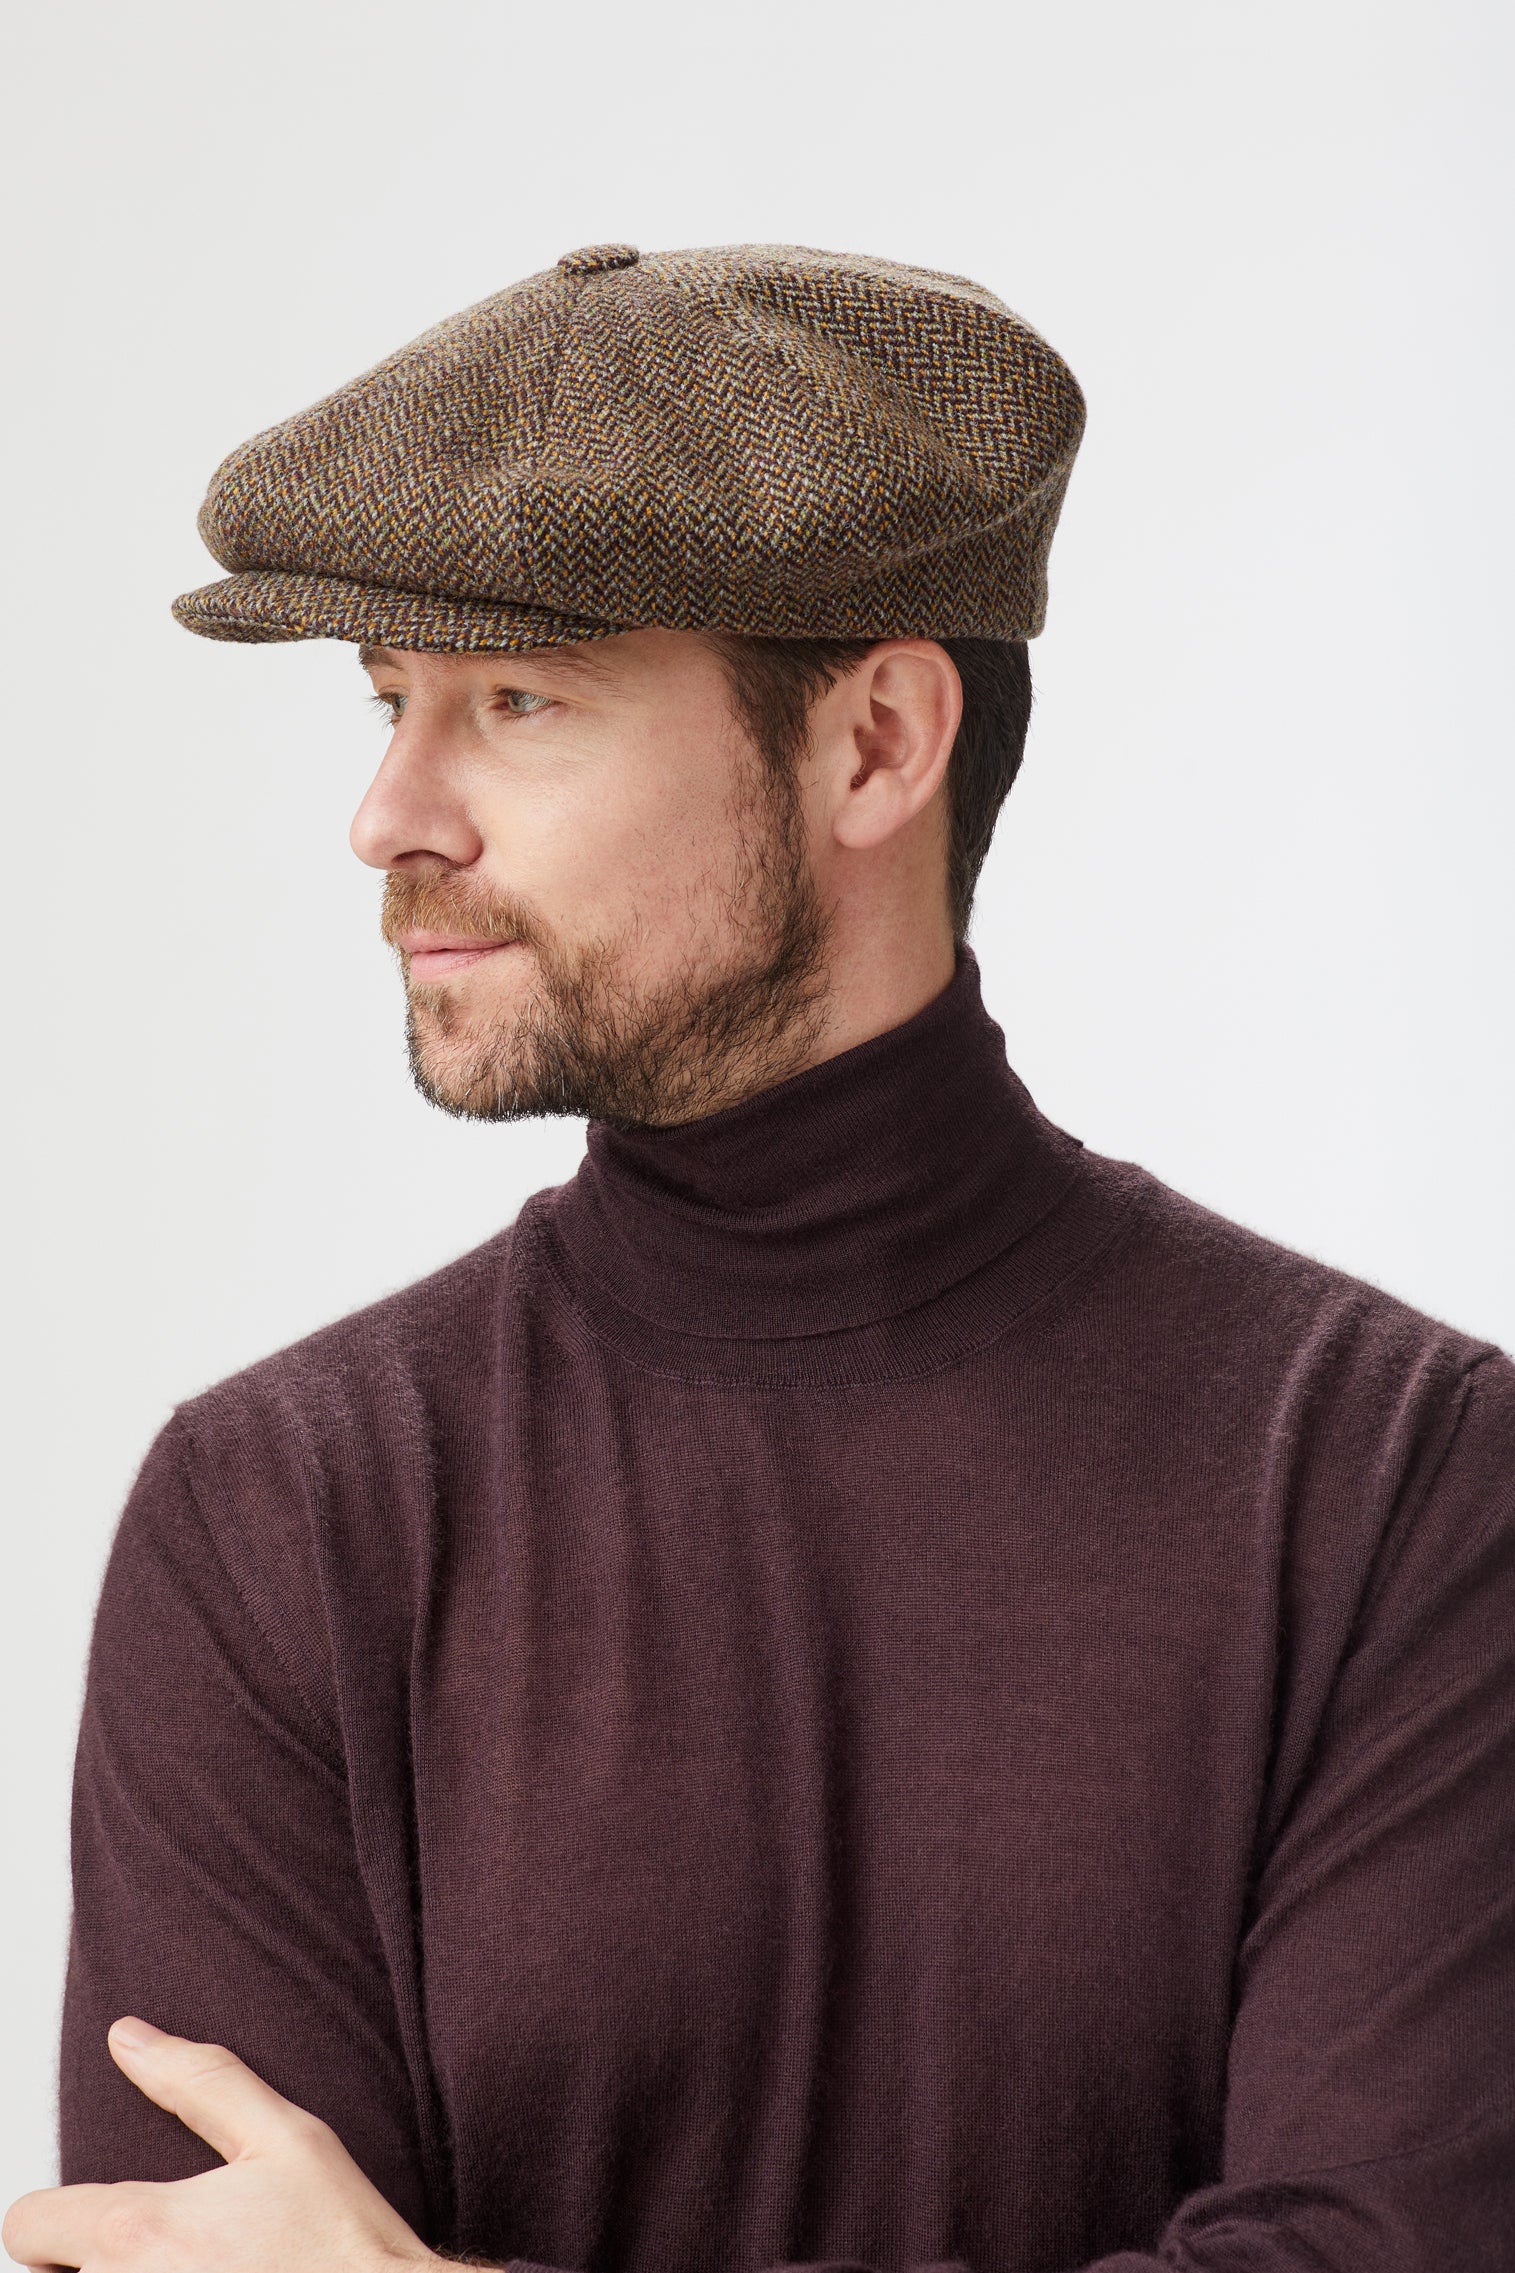 Sandwich Tweed Bakerboy Cap - Hats for Square Face Shapes - Lock & Co. Hatters London UK